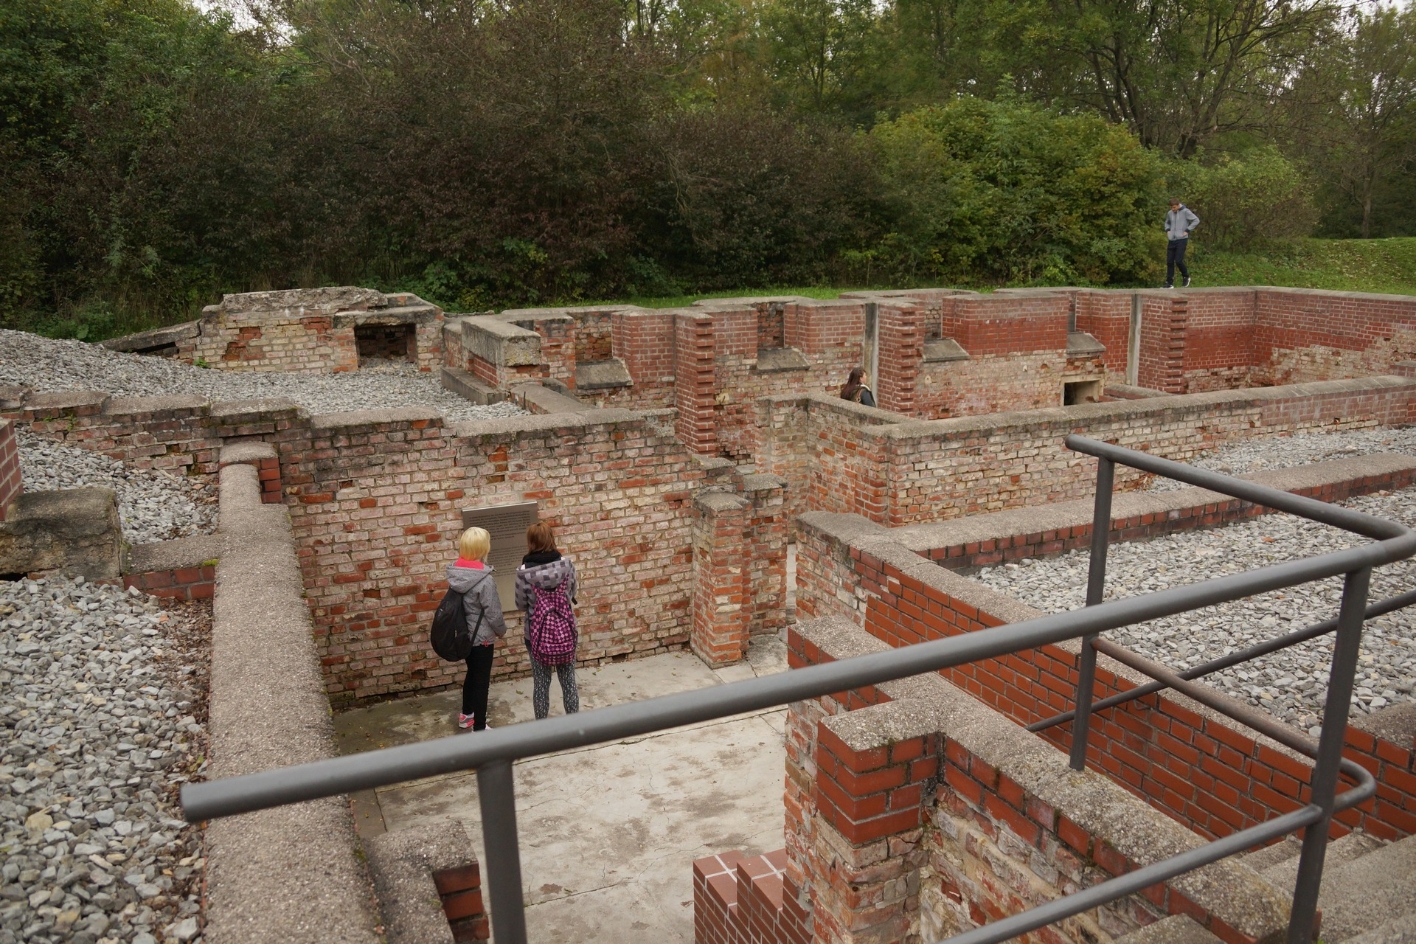 General view of the remains of the wall, which today form the Dietrich Bonhoeffer Memorial. The walls form the walls of a cellar, which today is open to the top. 